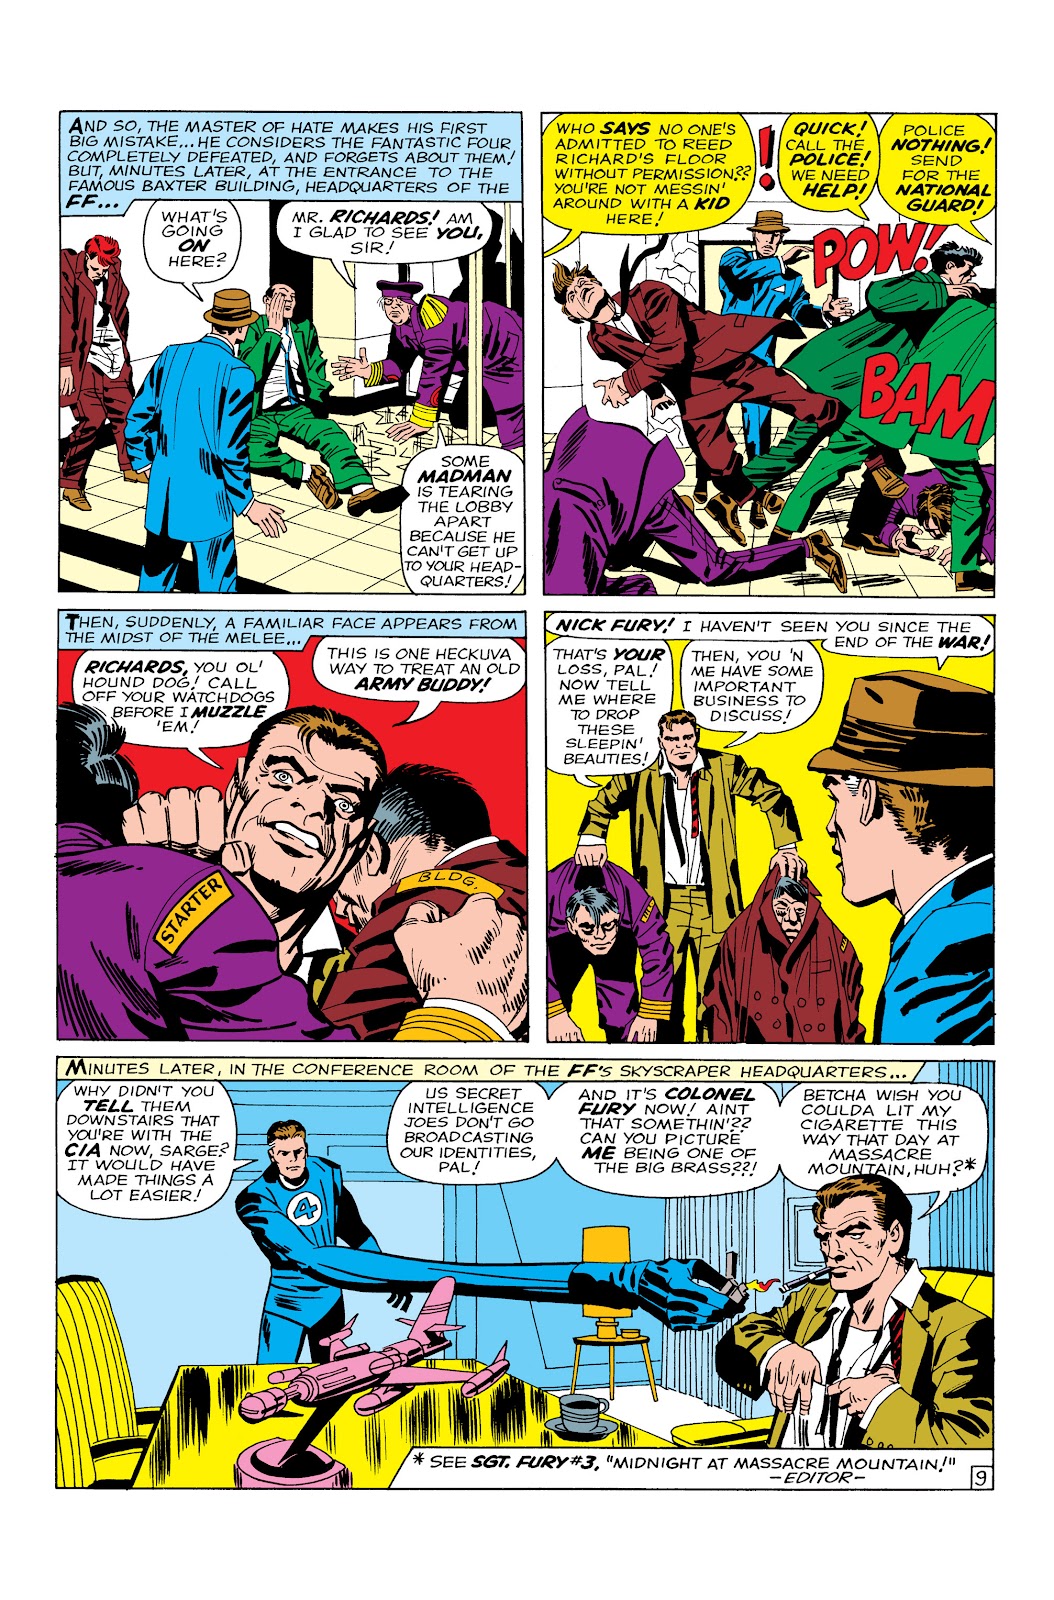 Read online Marvel Masterworks: The Fantastic Four comic - Issue # TPB 3 (Part 1) - 12